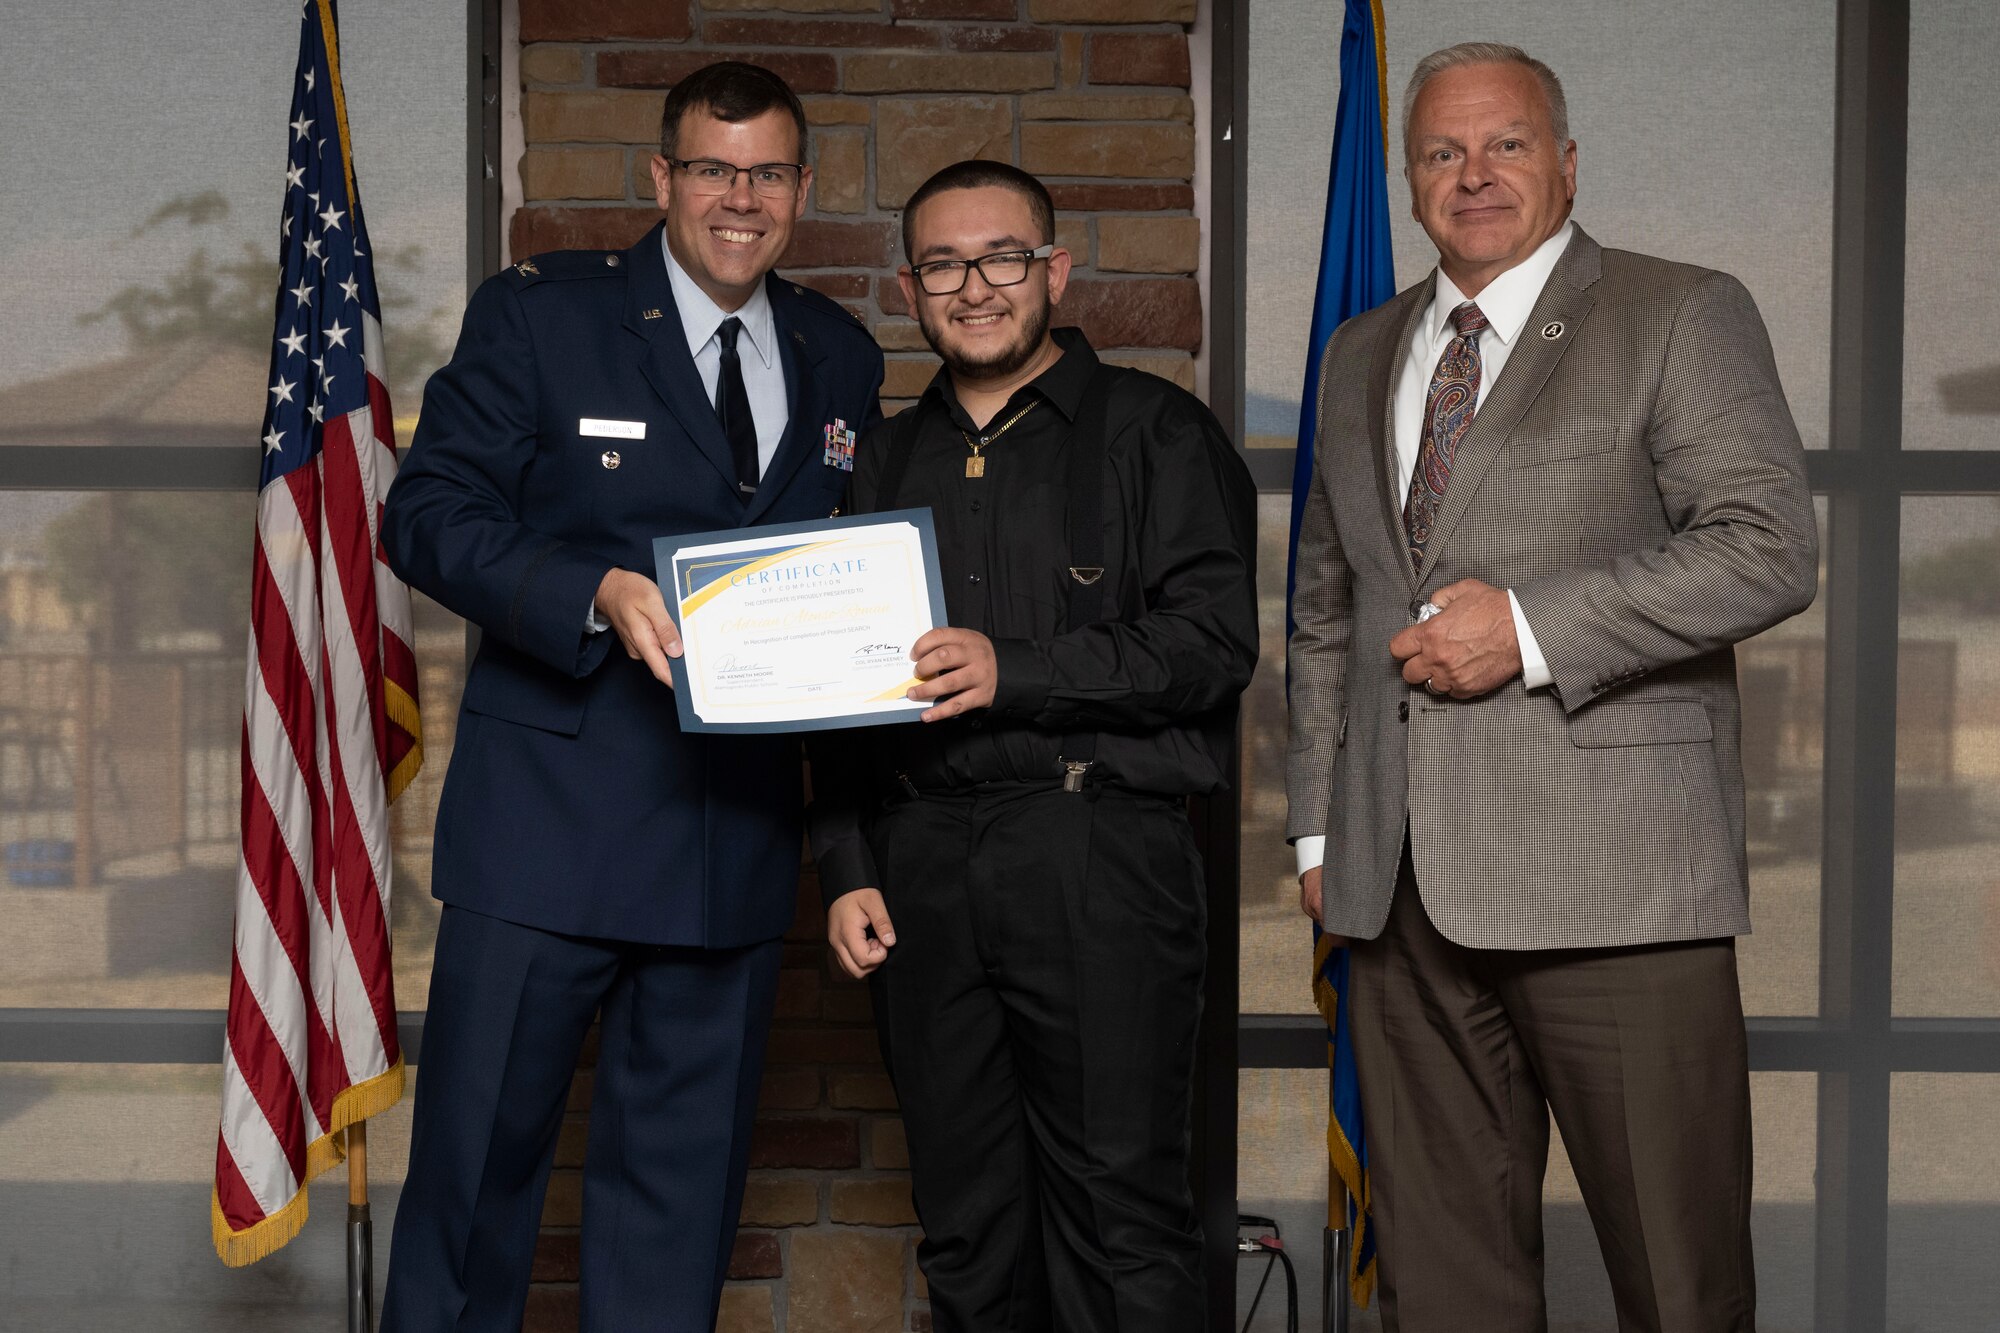 Adrian Alonson-Roman, Project SEARCH intern, receives graduation certificate, May 24, 2022, on Holloman Air Force Base, New Mexico.